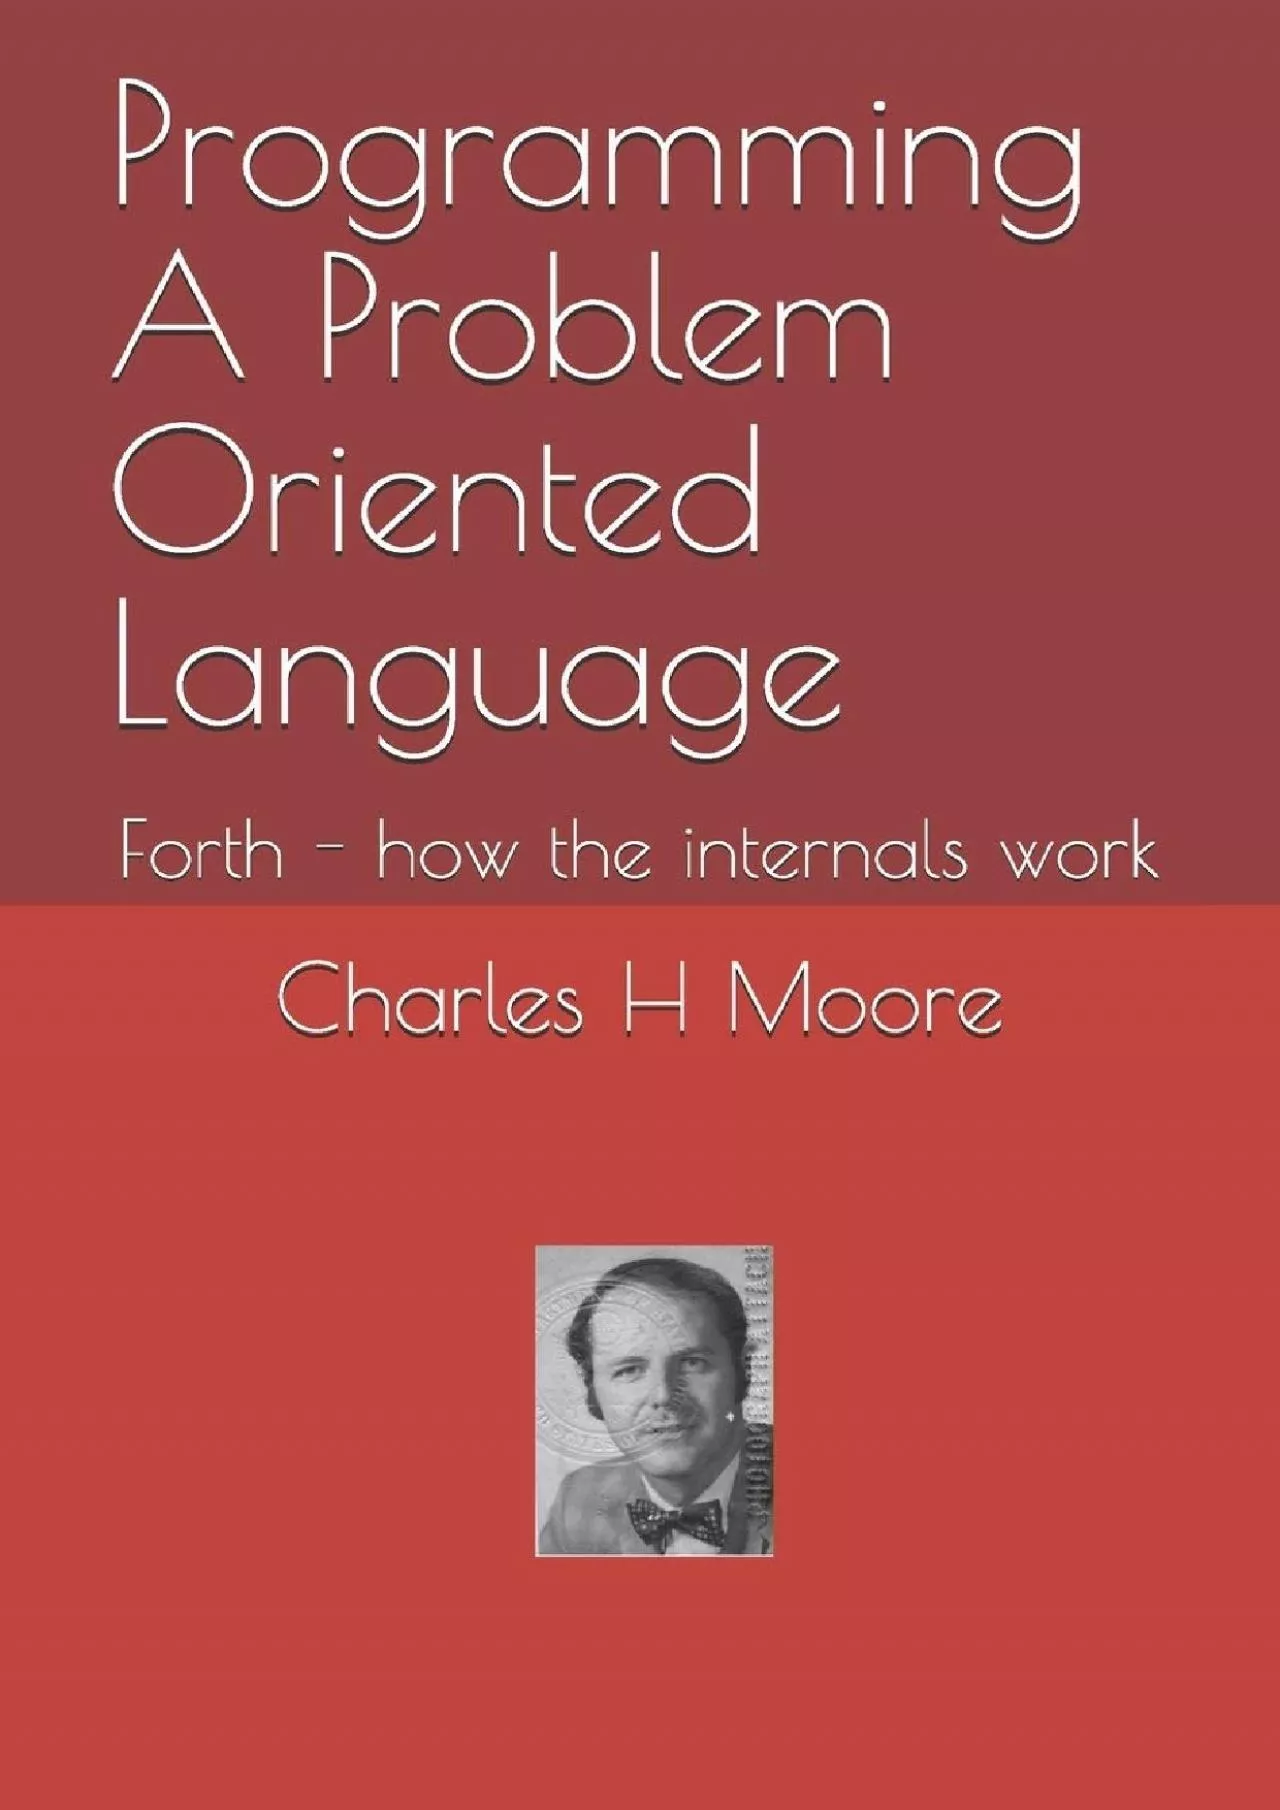 [READING BOOK]-Programming A Problem Oriented Language: Forth - how the internals work